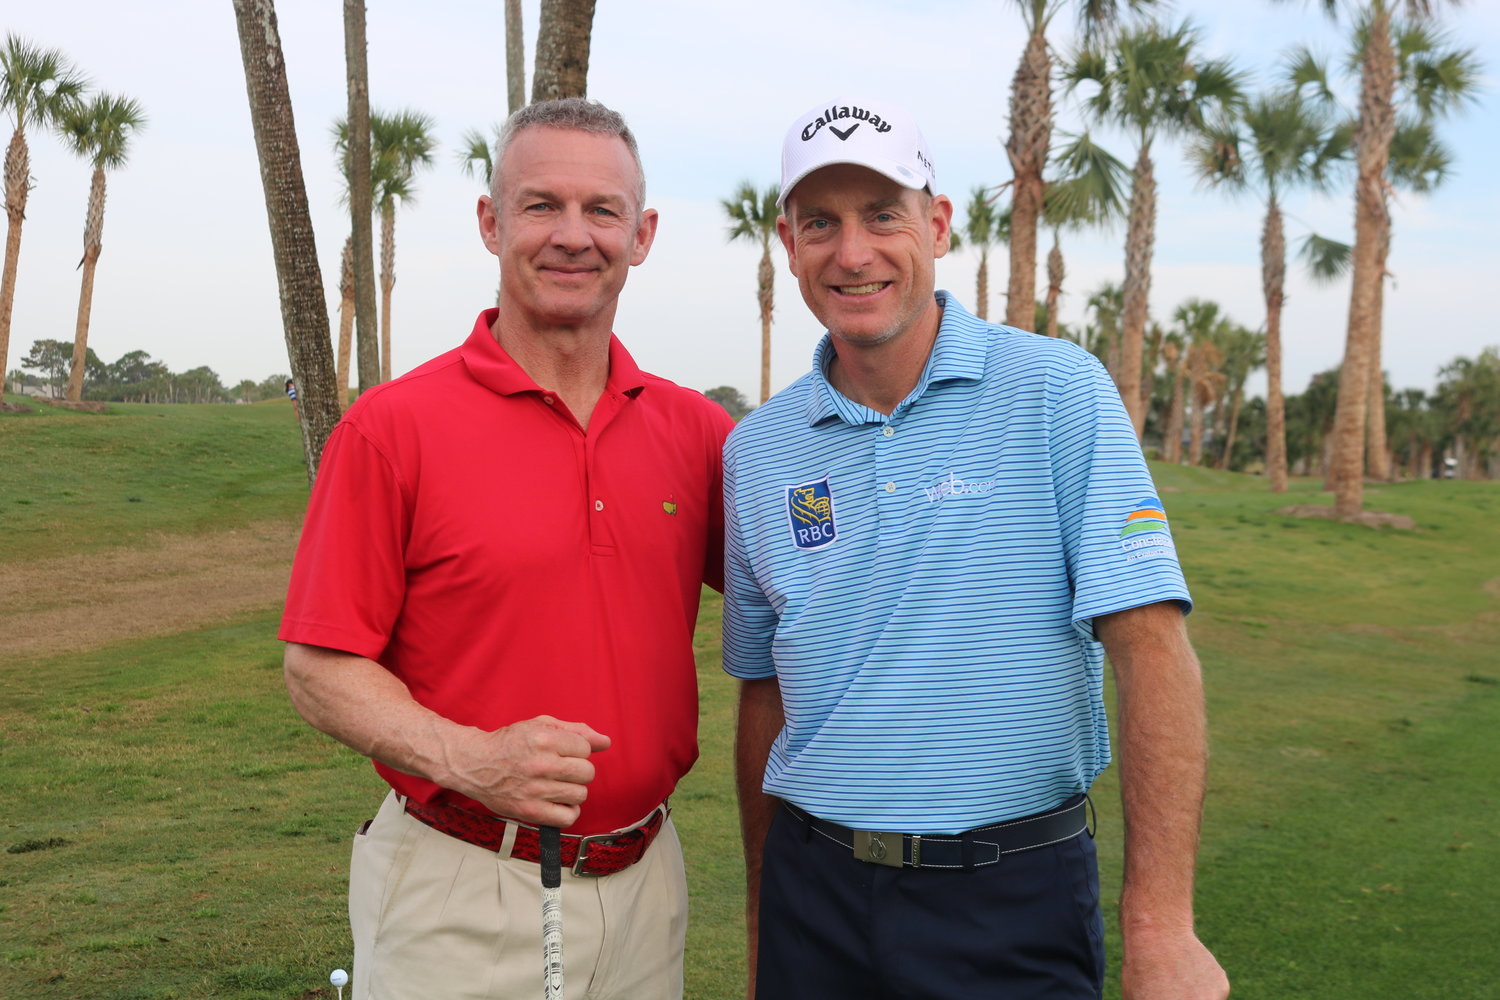 Merril Hoge and Jim Furyk at the golf tournament at Sawgrass Country Club